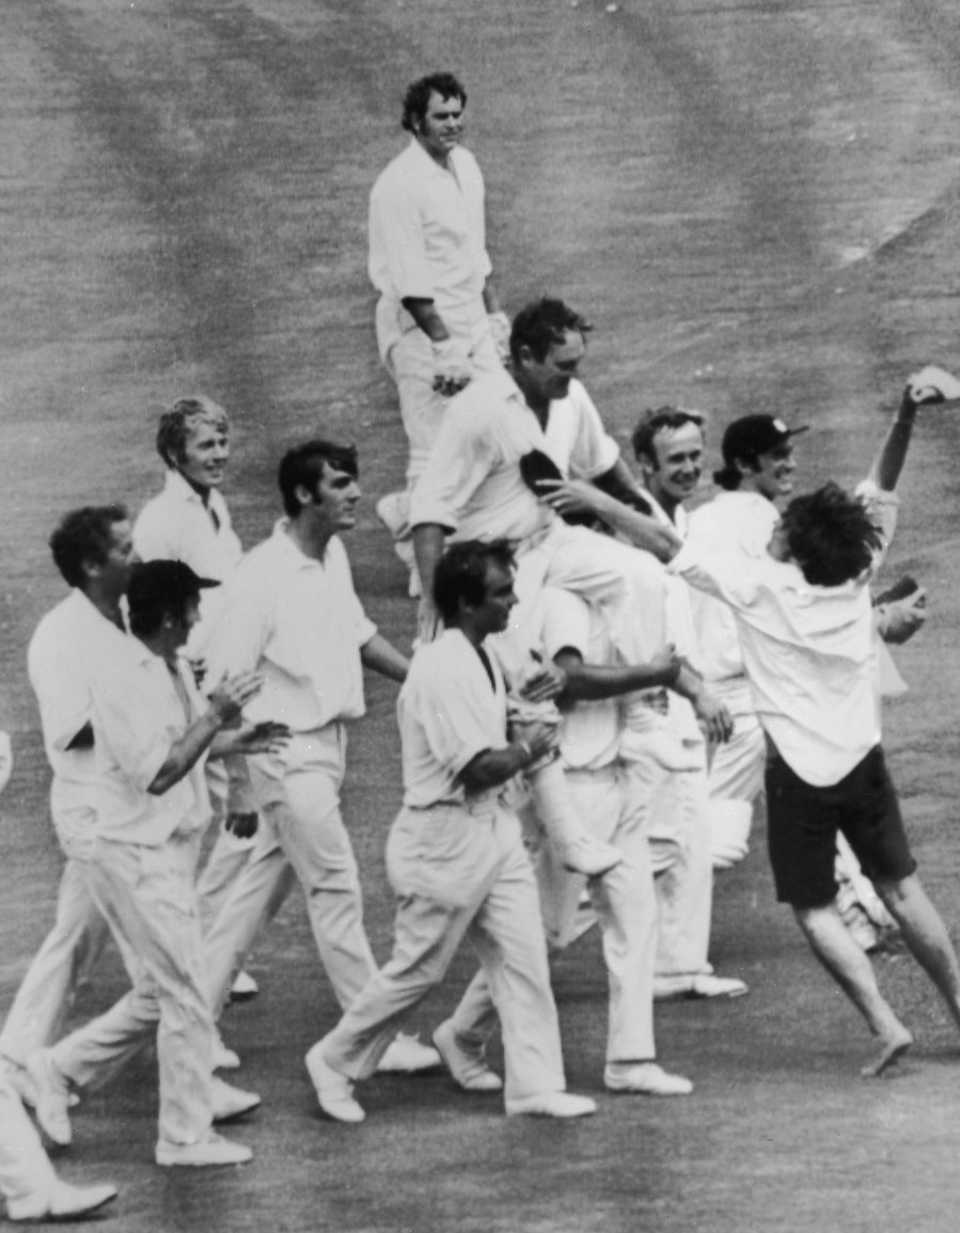 England captain Ray Illingworth is lifted onto the shoulders of his team-mates after the Ashes win